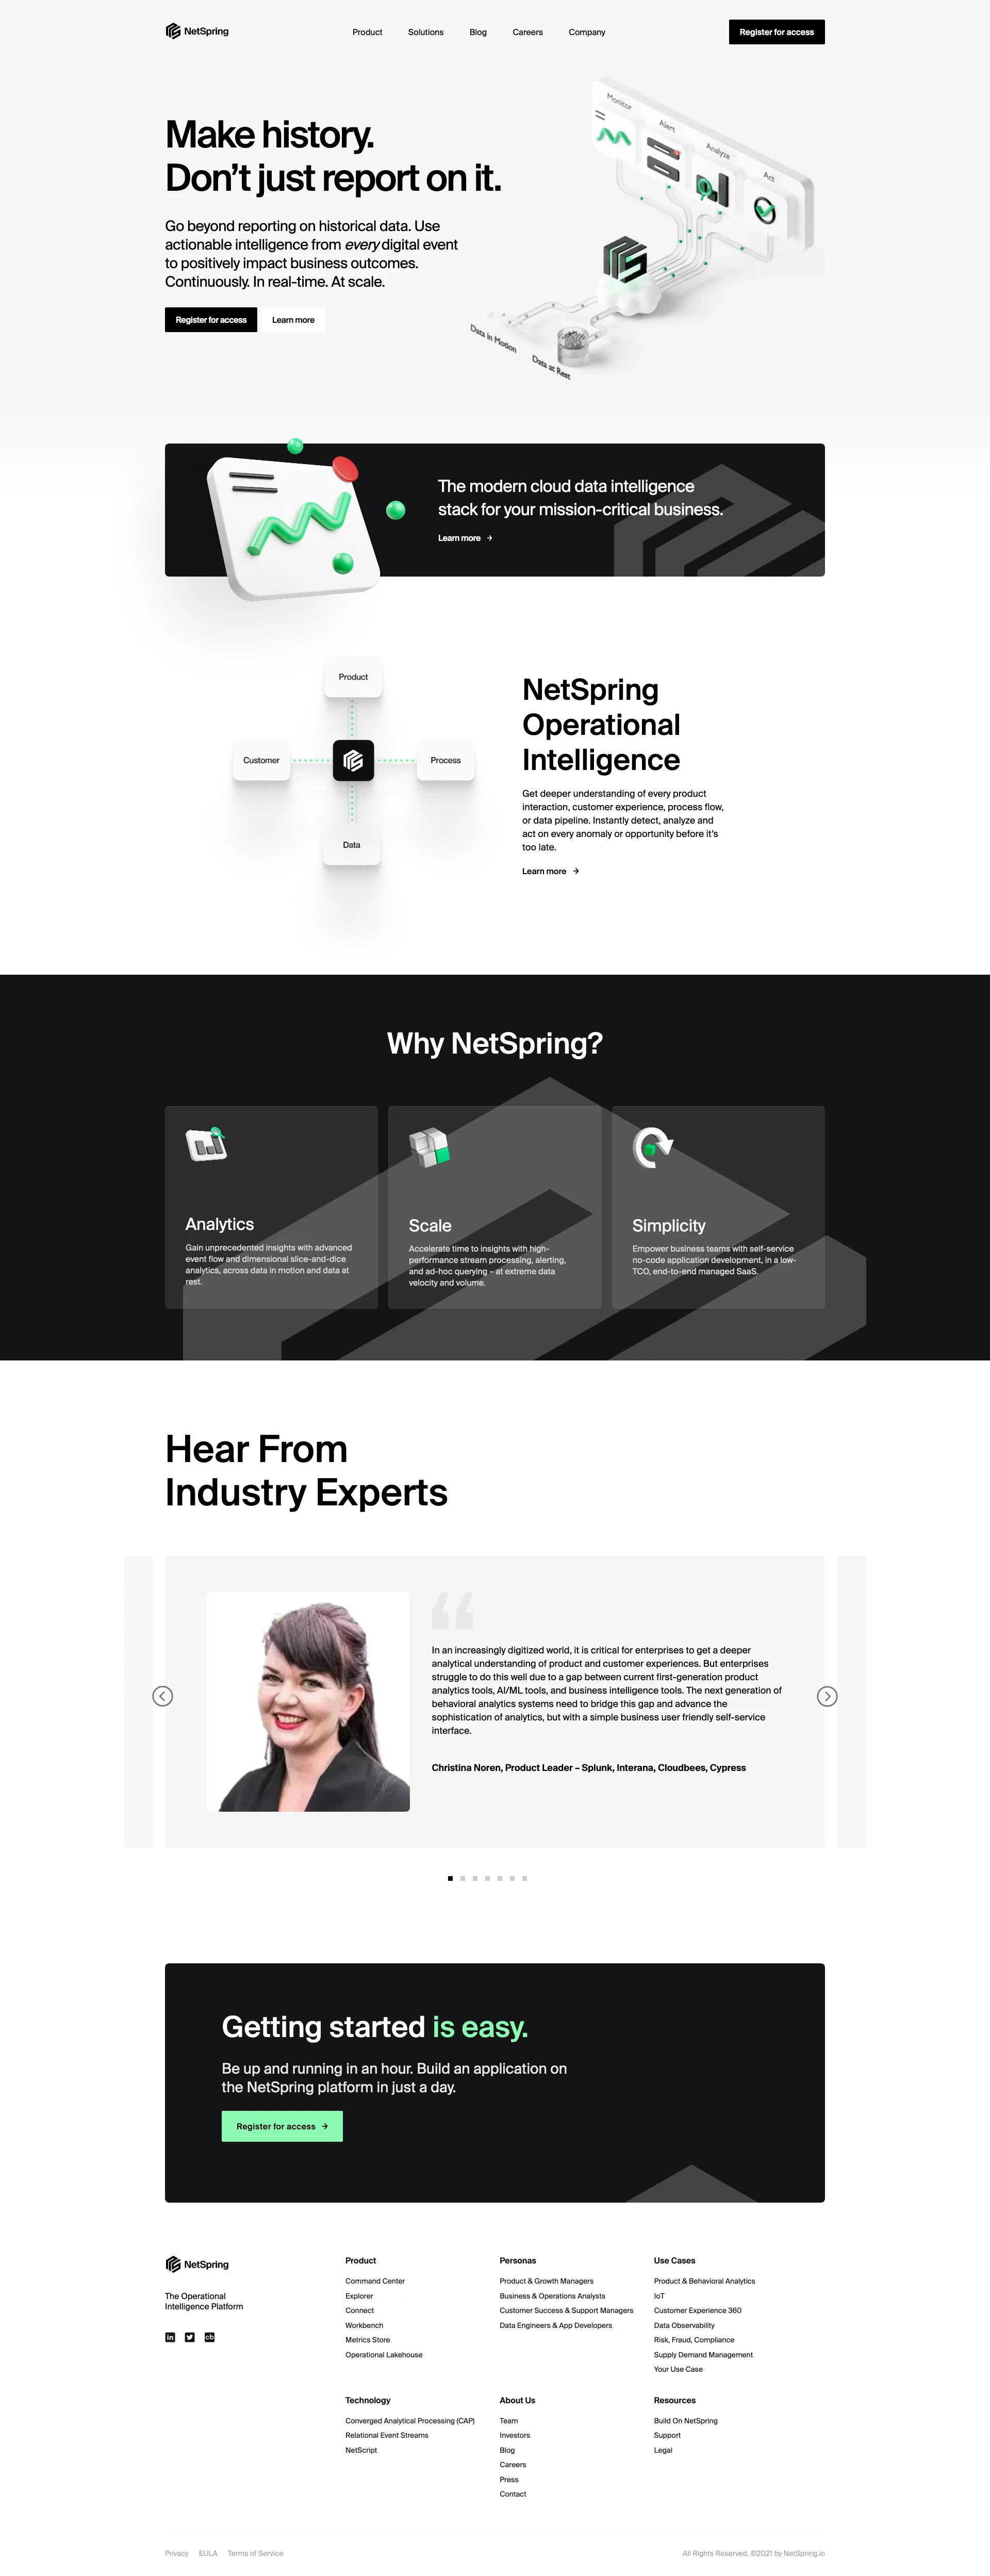 NetSpring Landing Page Example: Go beyond reporting on historical data. Use actionable intelligence from every digital event to positively impact business outcomes. Continuously. In real-time. At scale.